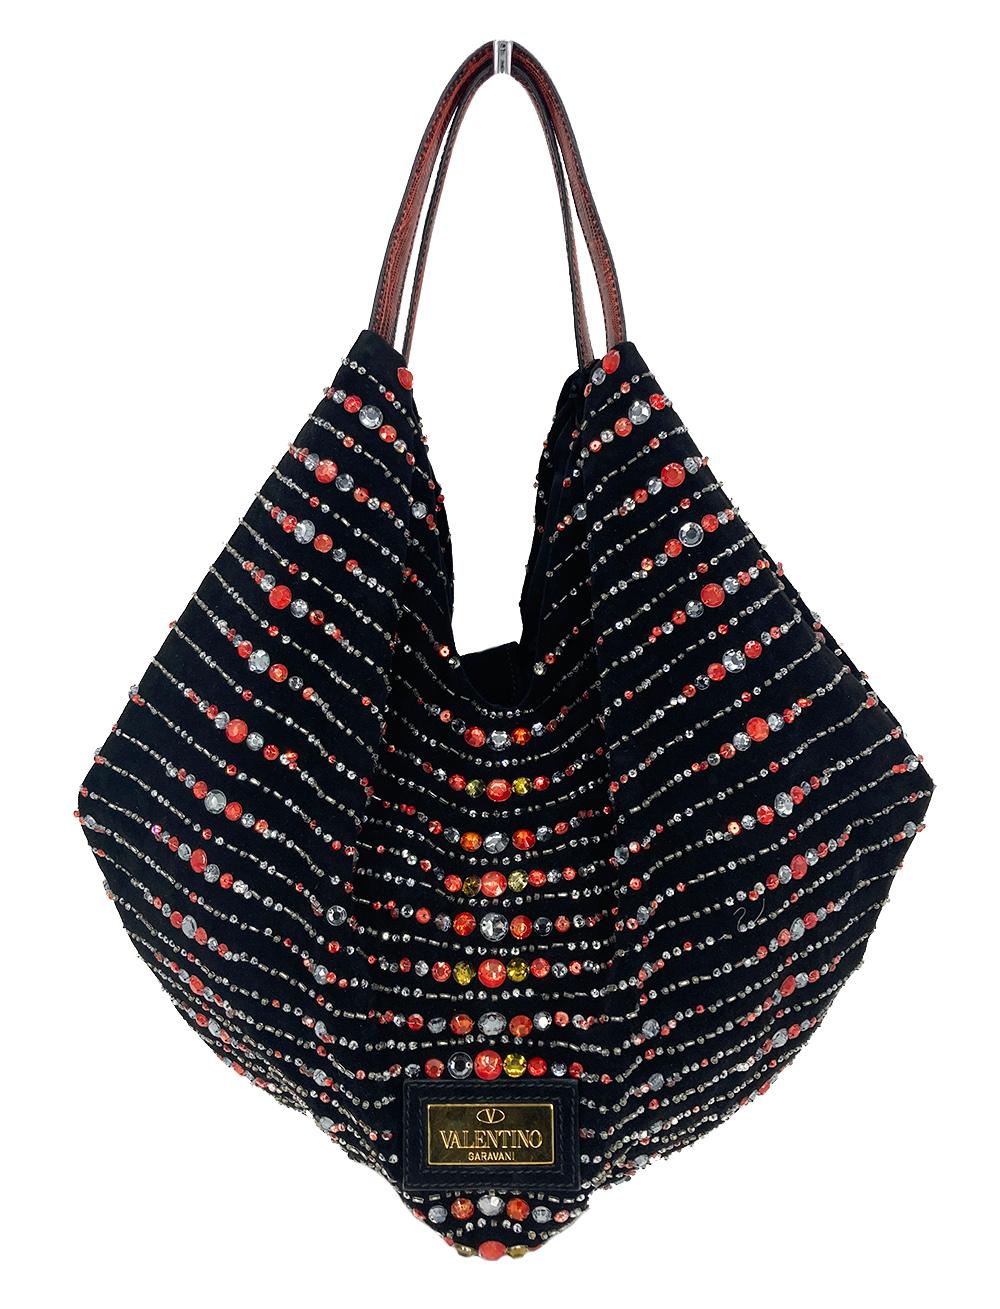 Valentino Black Suede Rhinestone Beaded Tote in good condition. Black suede exterior trimmed with multi color rhinestones and beads in silver, red, gray and yellow trimmed with a front suede bow accent and red lizard leather shoulder straps. Unique